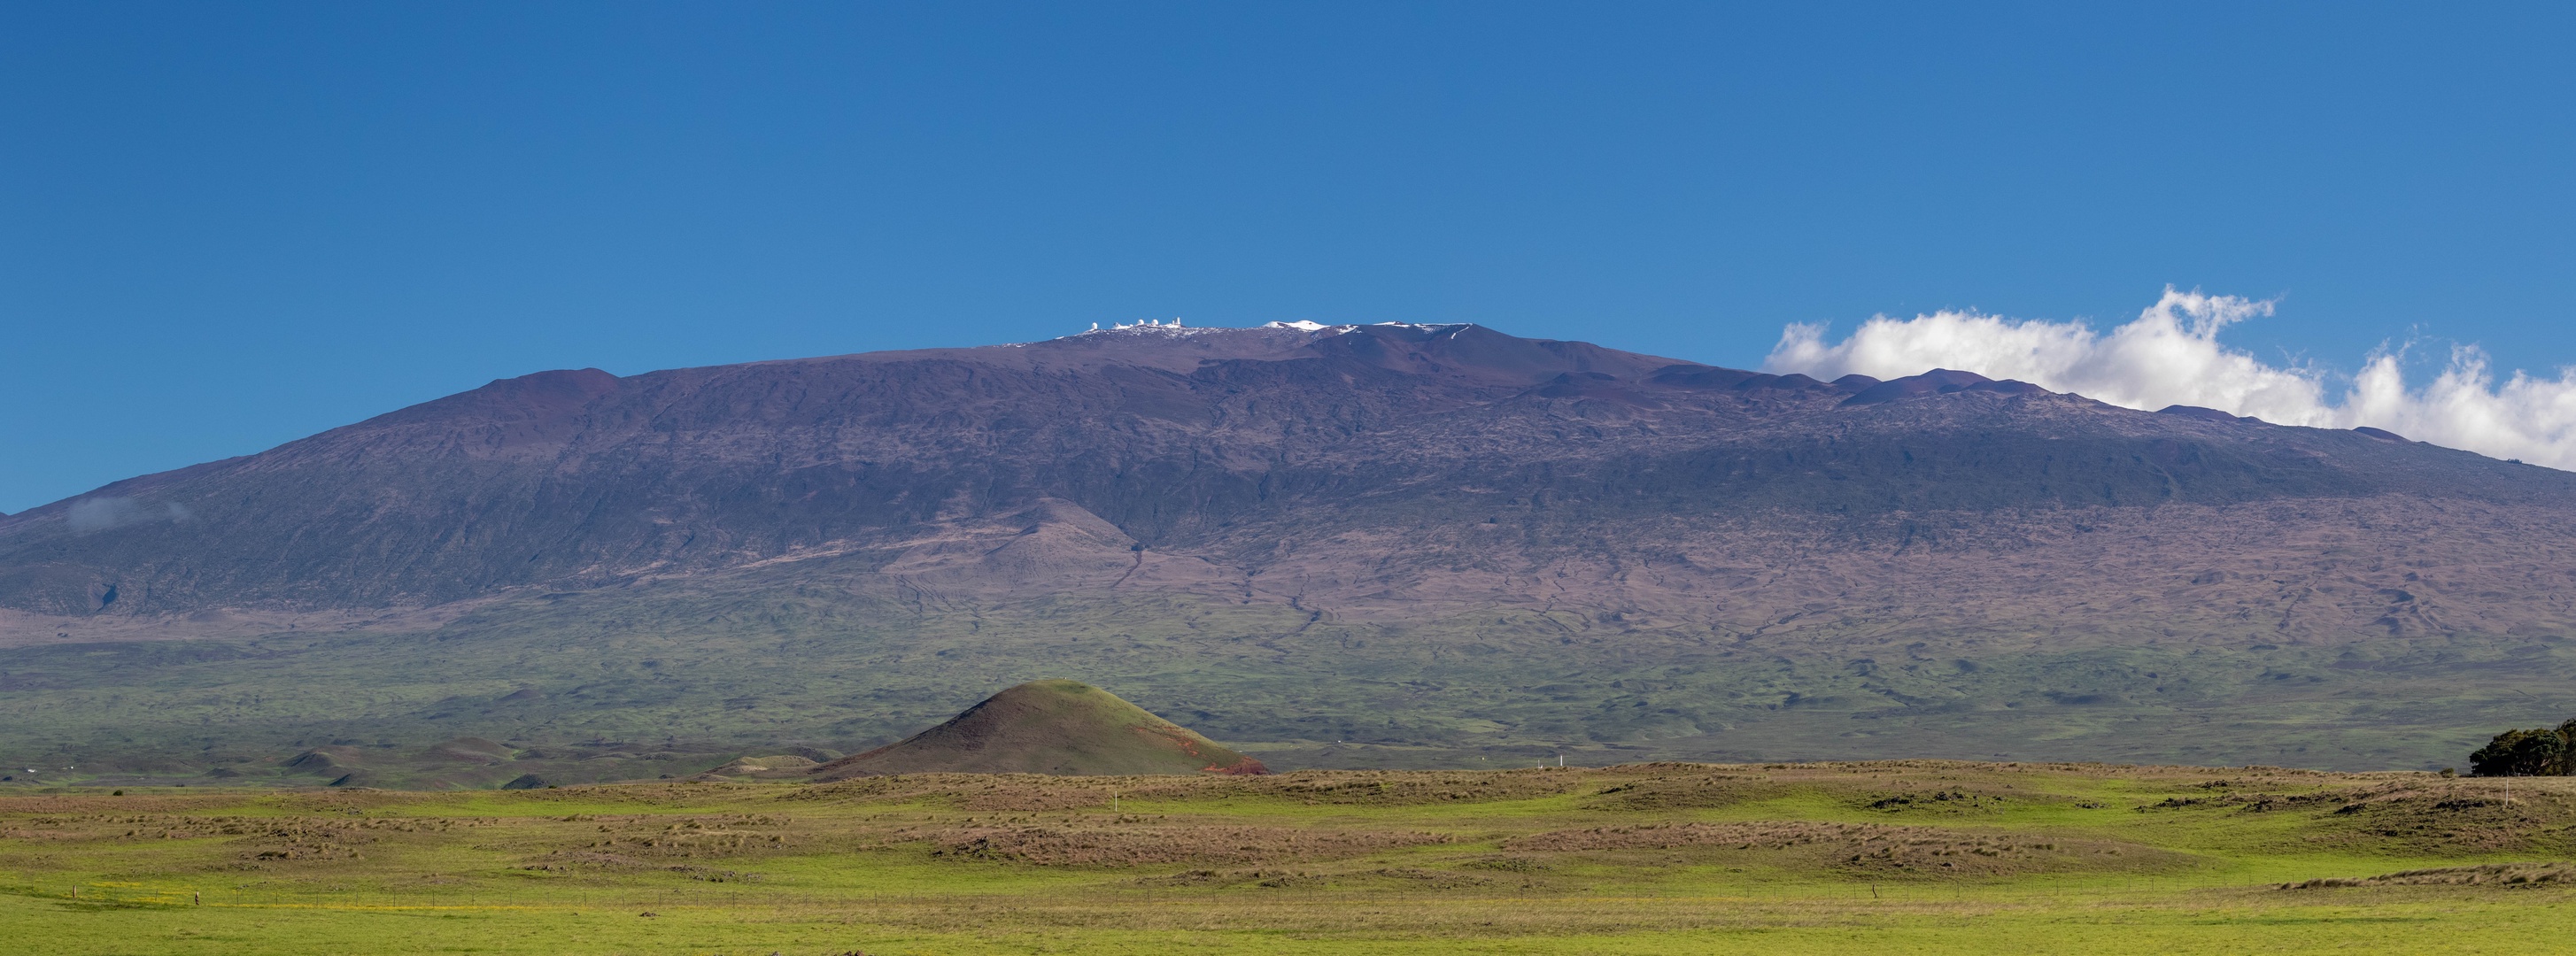 Kamuela Vacation Rentals, Palm Villas E1 - Stunning View of Sno-Capped Mauna Kea from Waimea, Just Up the Hill!